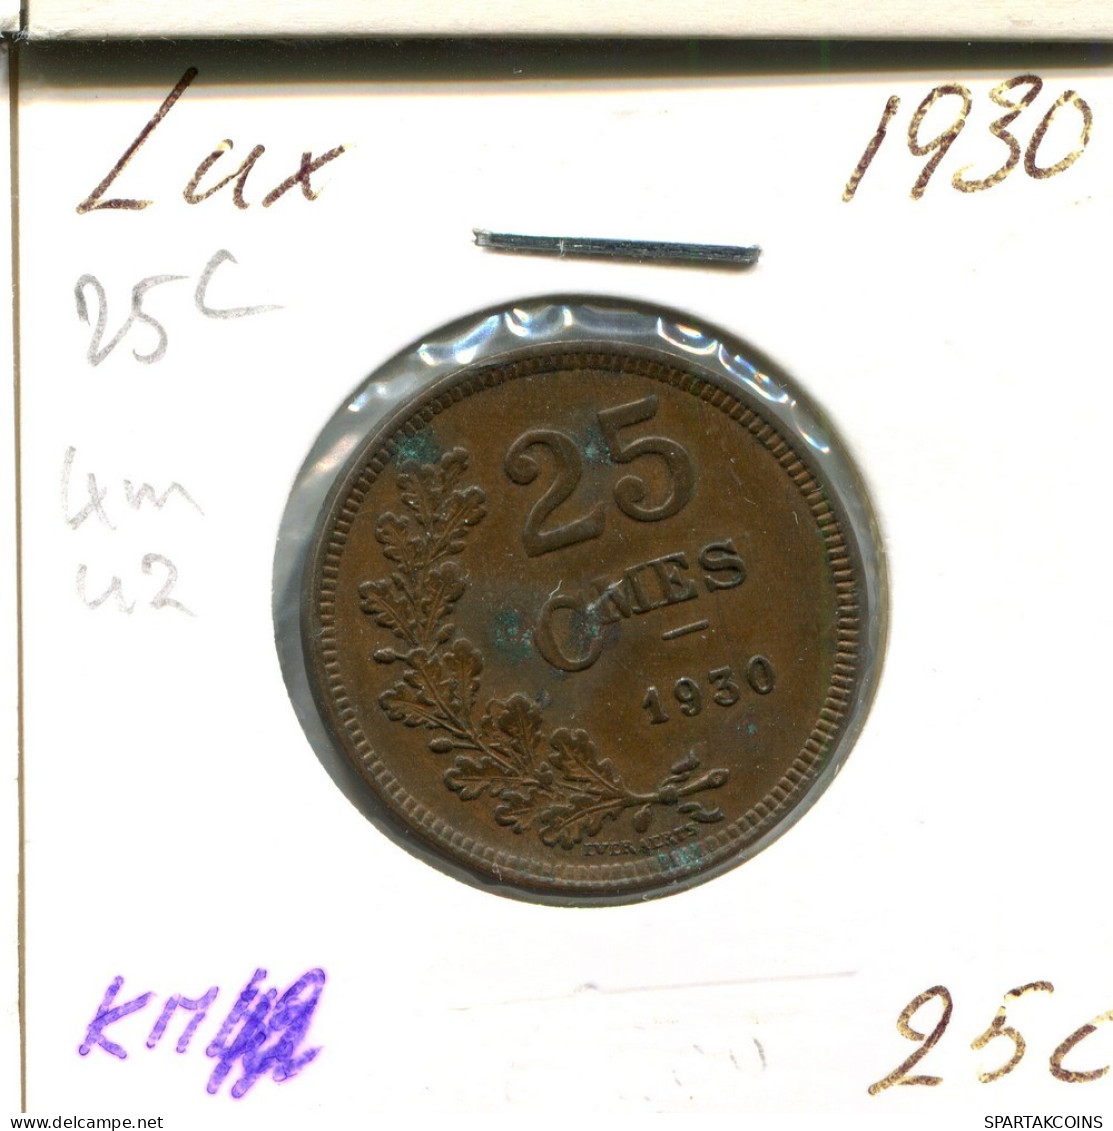 25 CENTIMES 1930 LUXEMBOURG Coin #AT189.U.A - Luxemburg